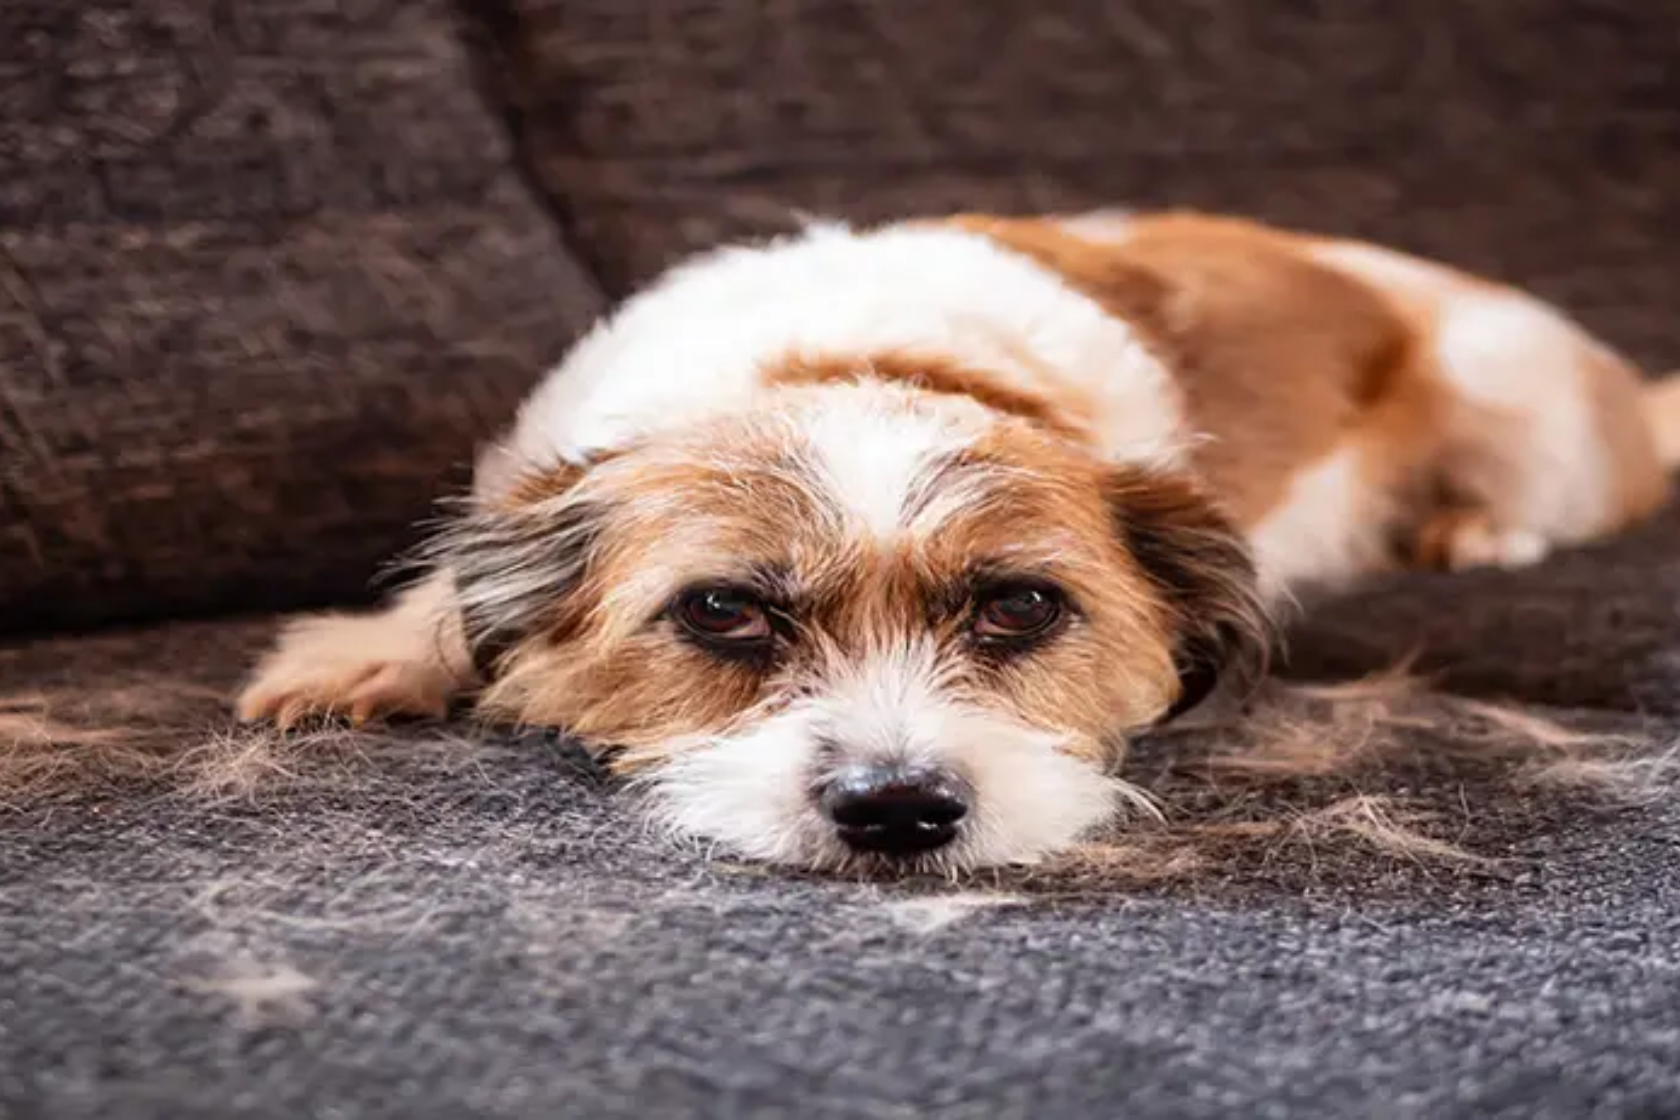 Dog lying on sofa covered in dog hair